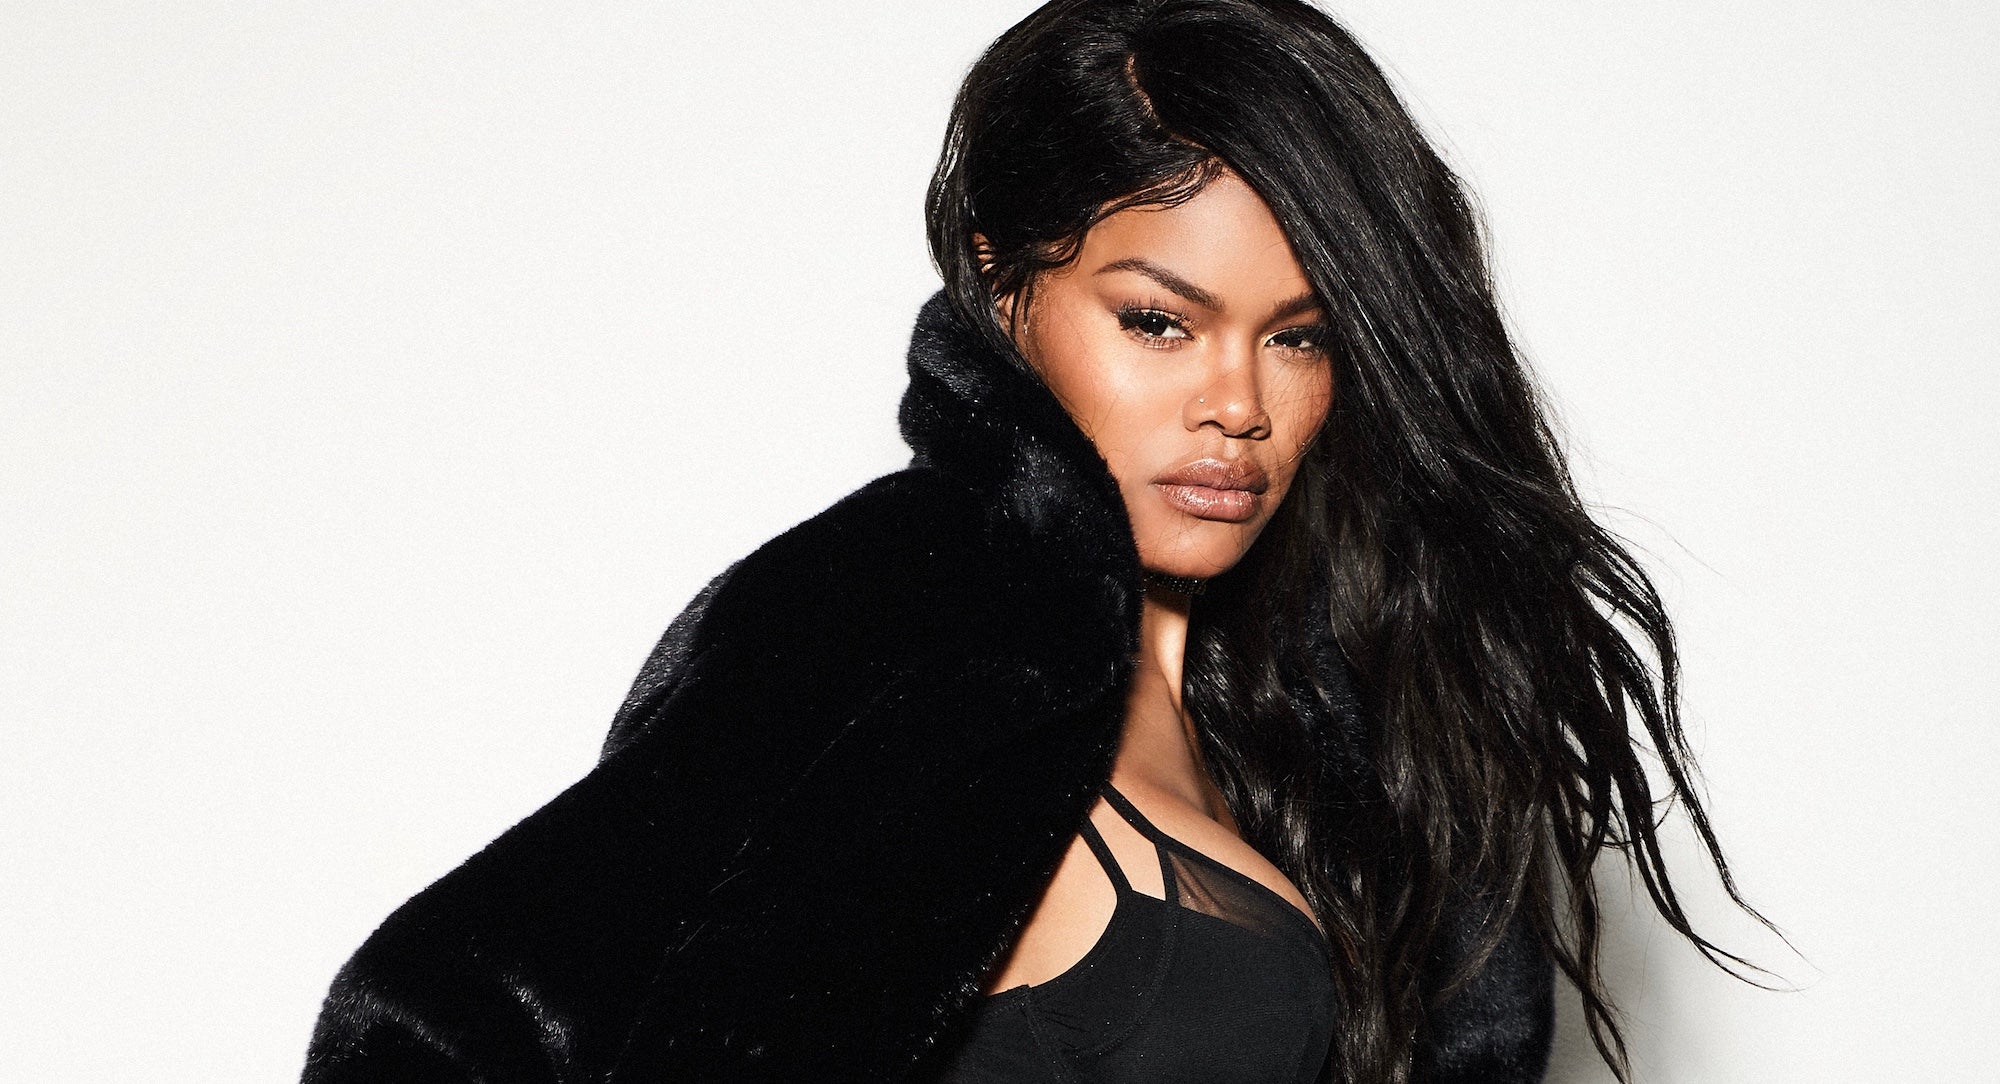 Teyana Taylor Is Quitting The Music Industry: 'I’m Retiring This Chapter Of My Story'